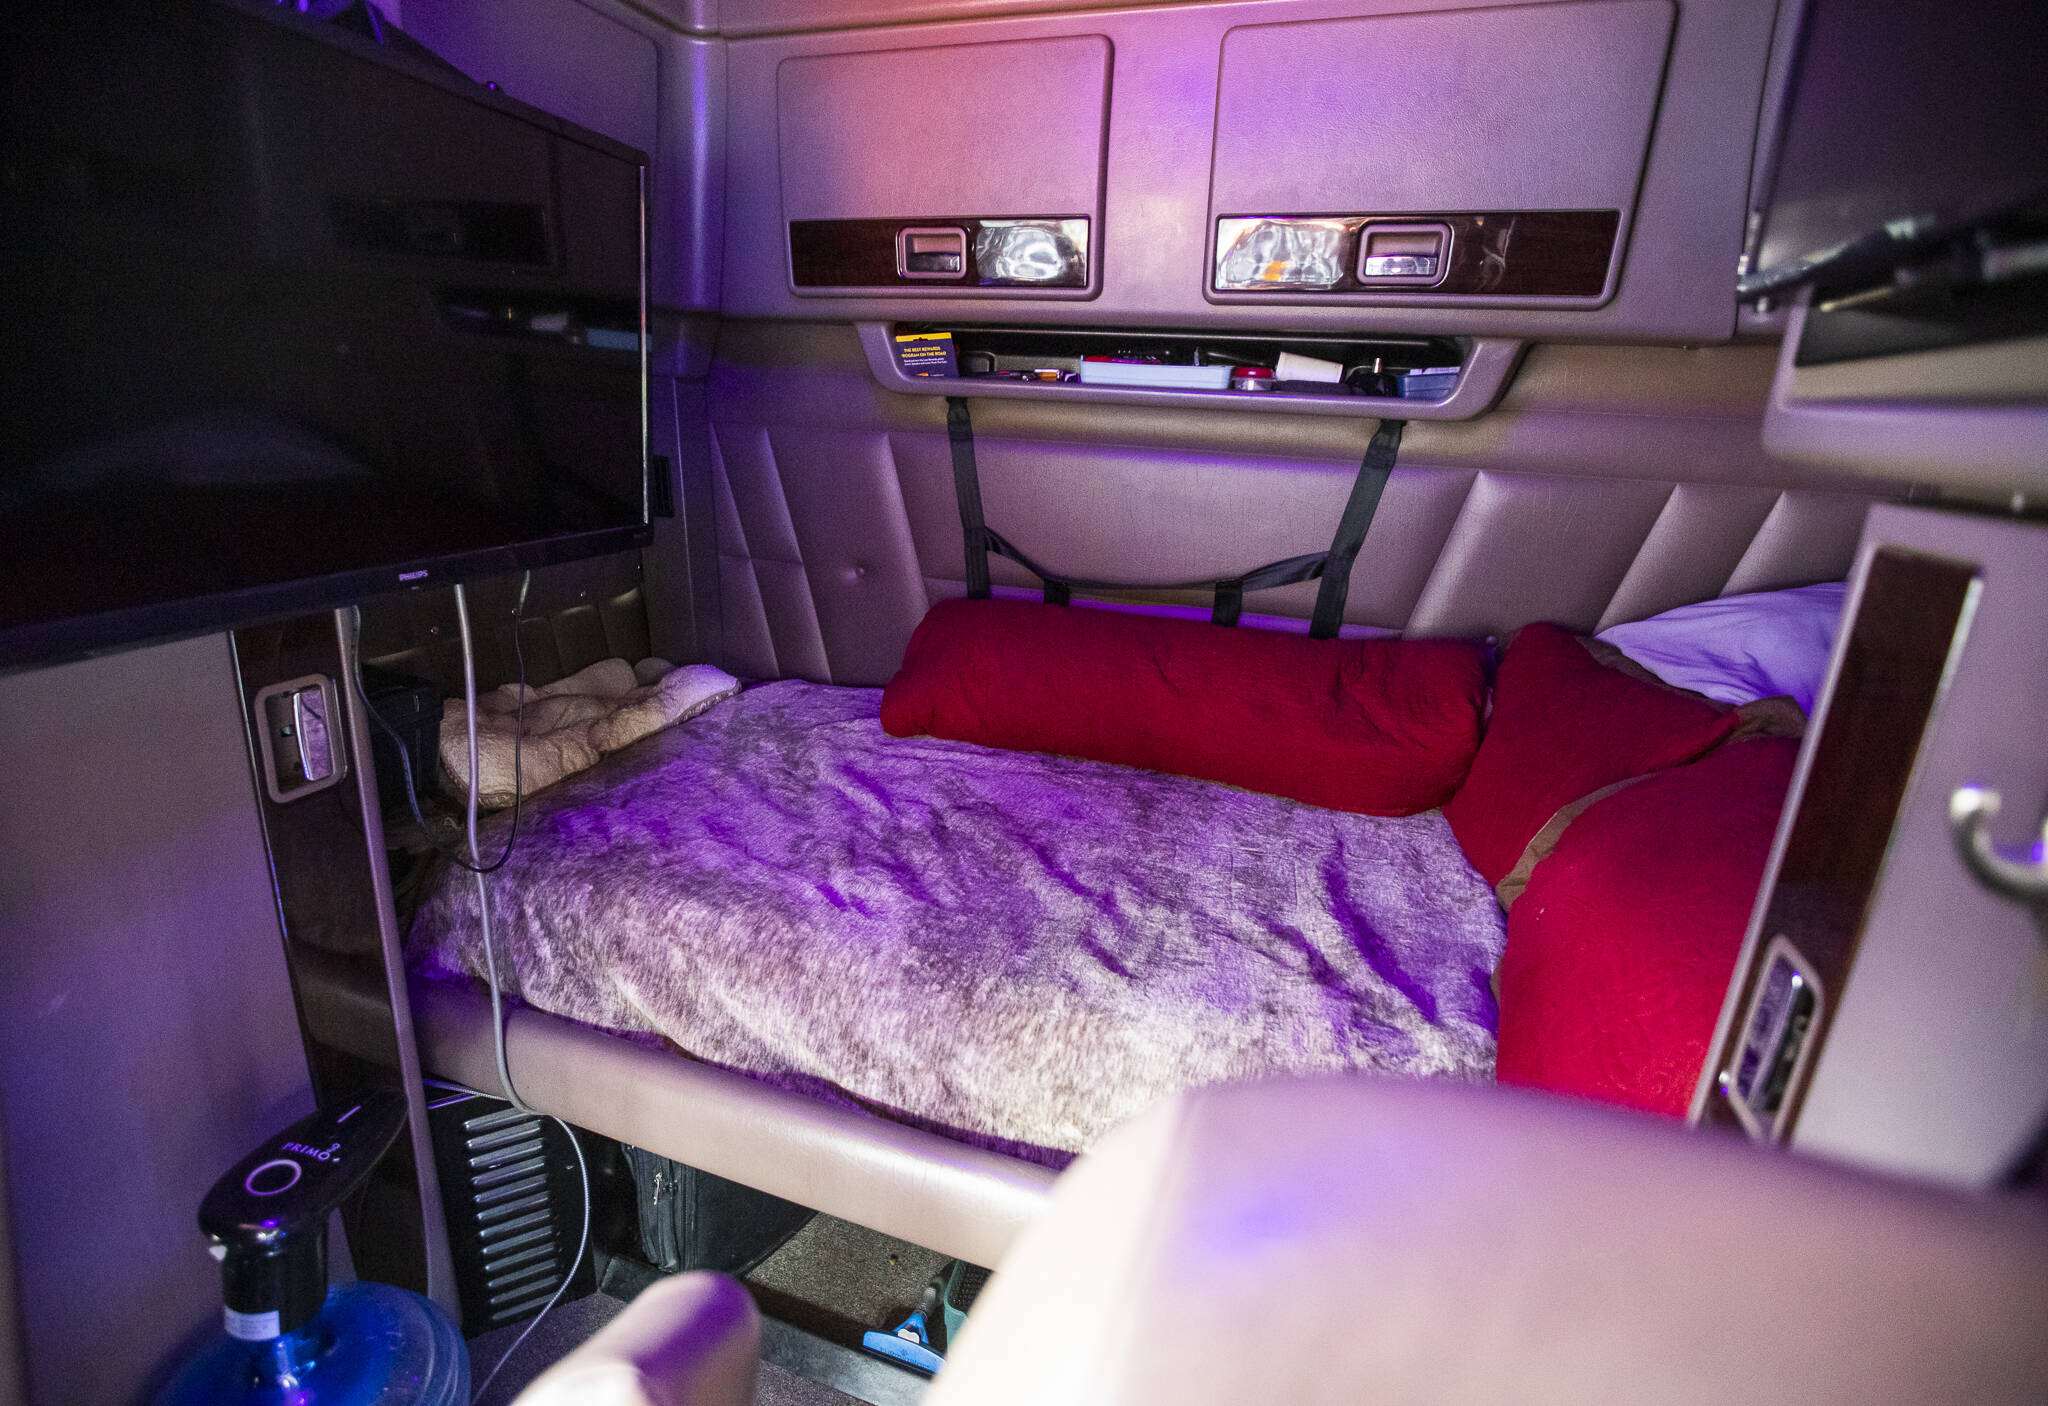 The sleeping quarters of Dirksen’s truck includes a television and a small refrigerator. (Olivia Vanni / The Herald)